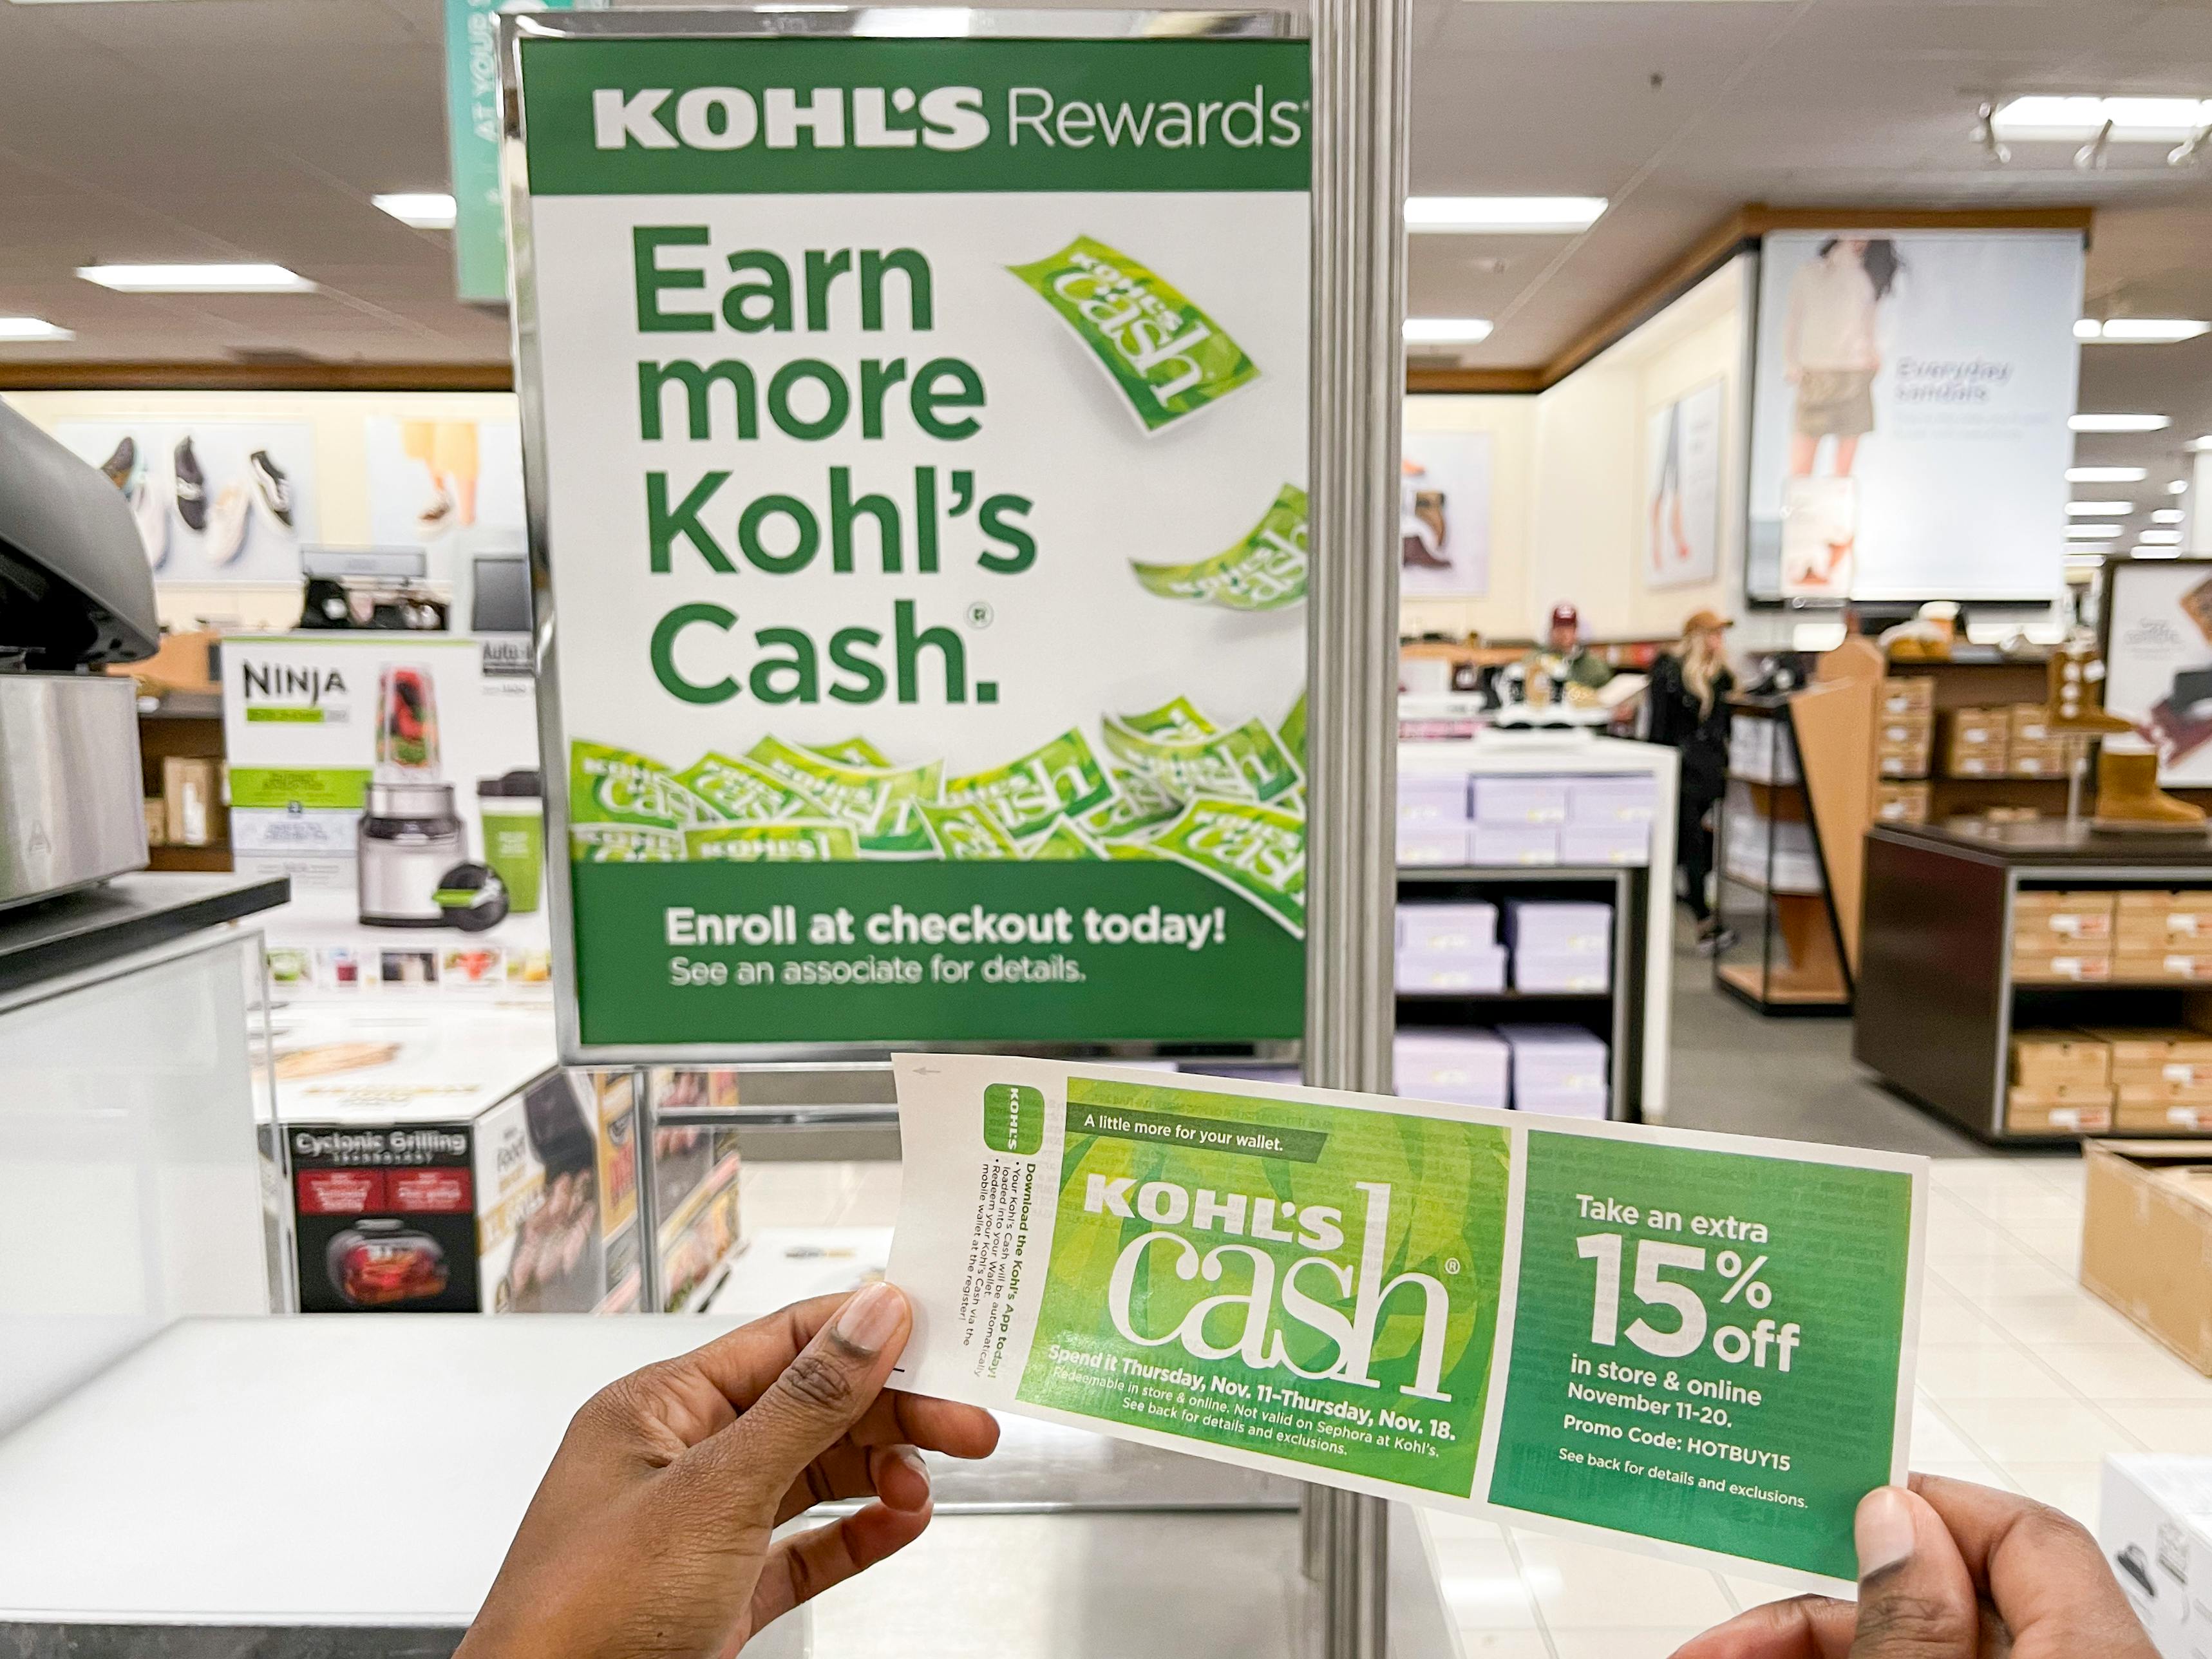 A person holding Kohl's cash near a Kohl's cash sign